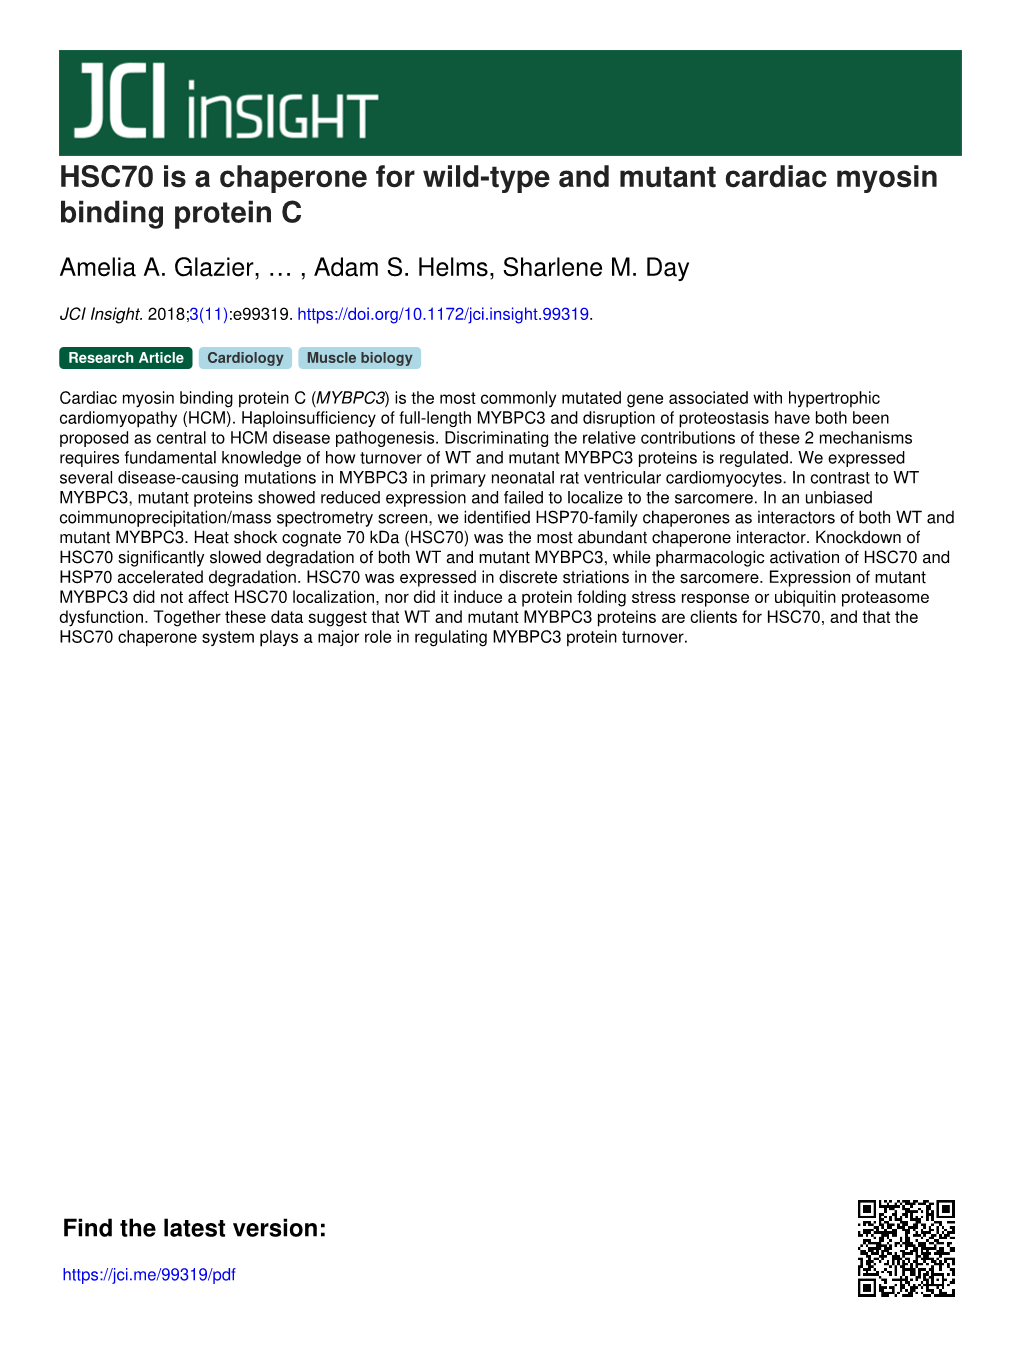 HSC70 Is a Chaperone for Wild-Type and Mutant Cardiac Myosin Binding Protein C